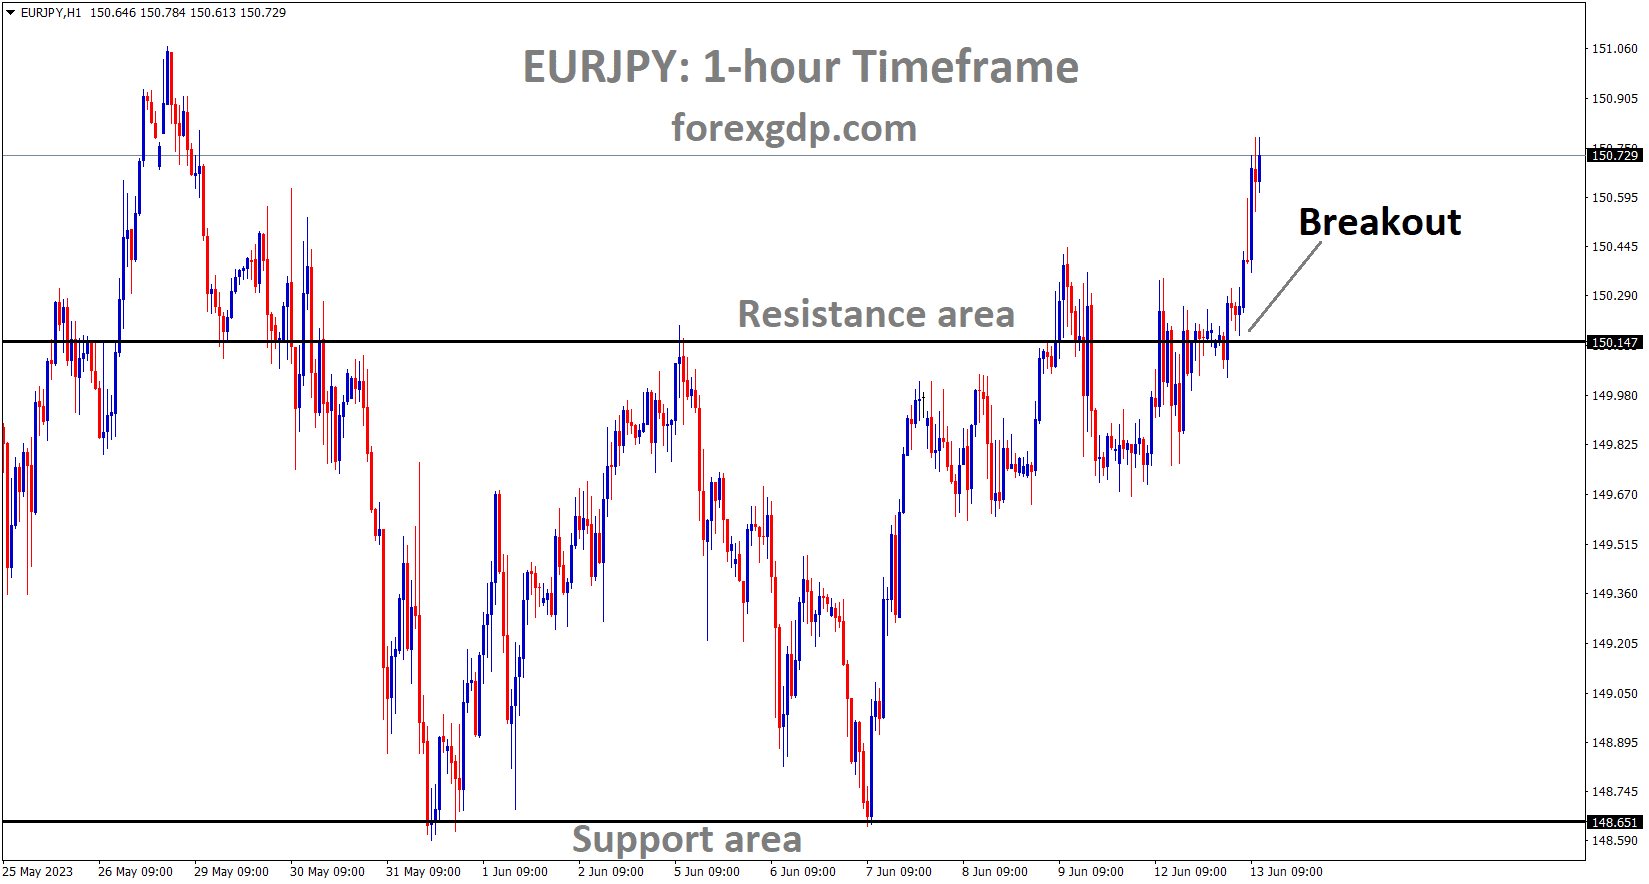 EURJPY has broken the Consolidation pattern in Upside